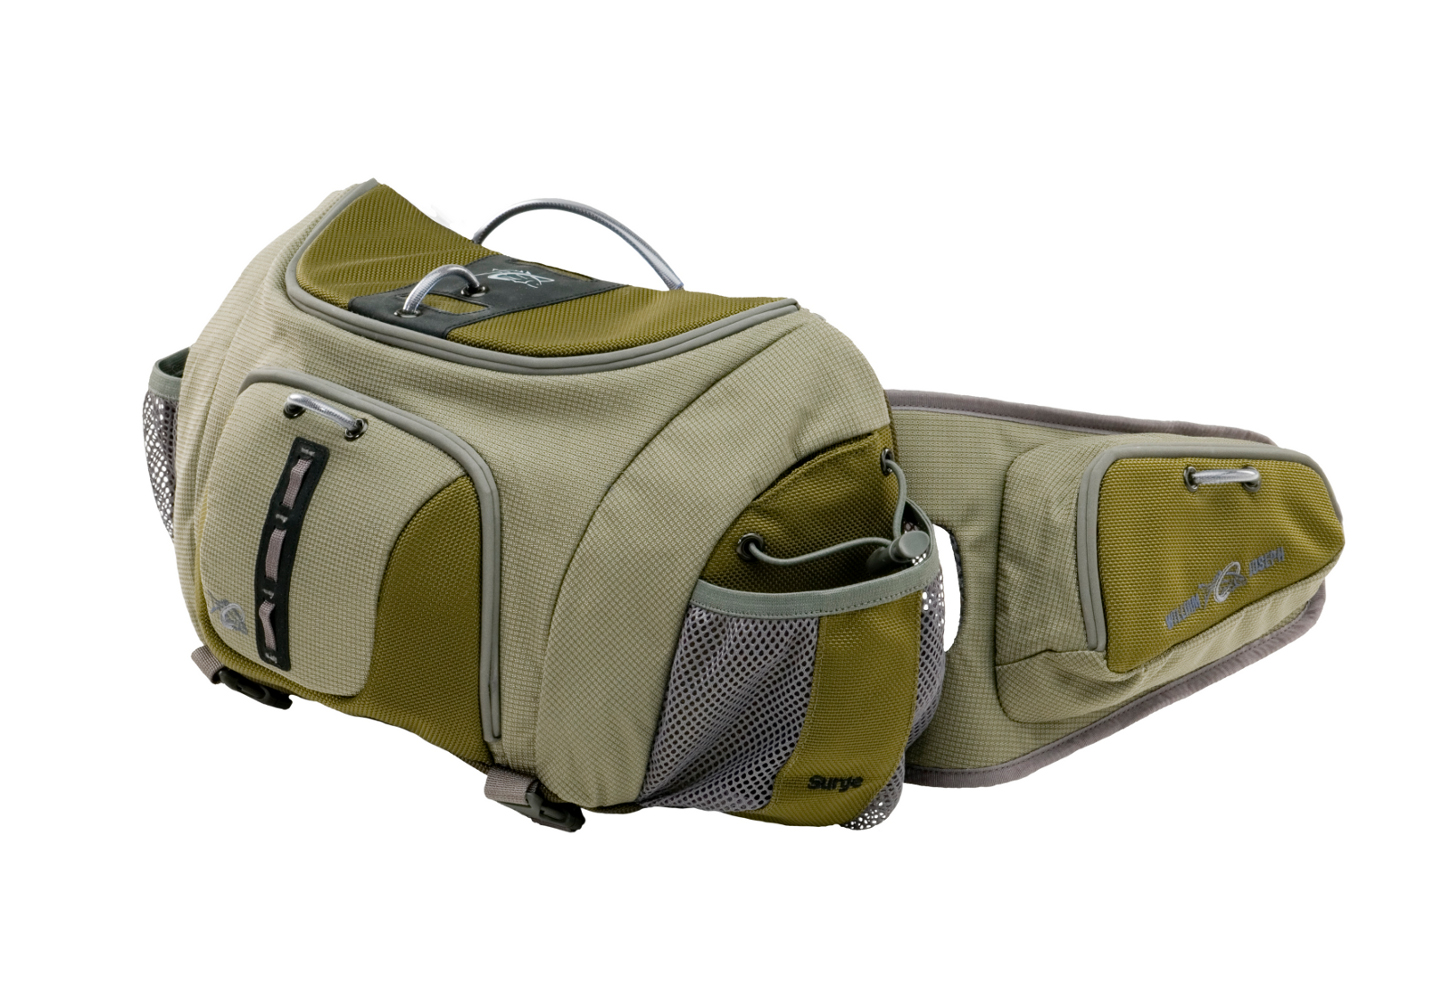 NEW WILLIAM JOSEPH Fishing Emerging Fanny Pack, Water Bottles, Fly Fishing  $44.00 - PicClick